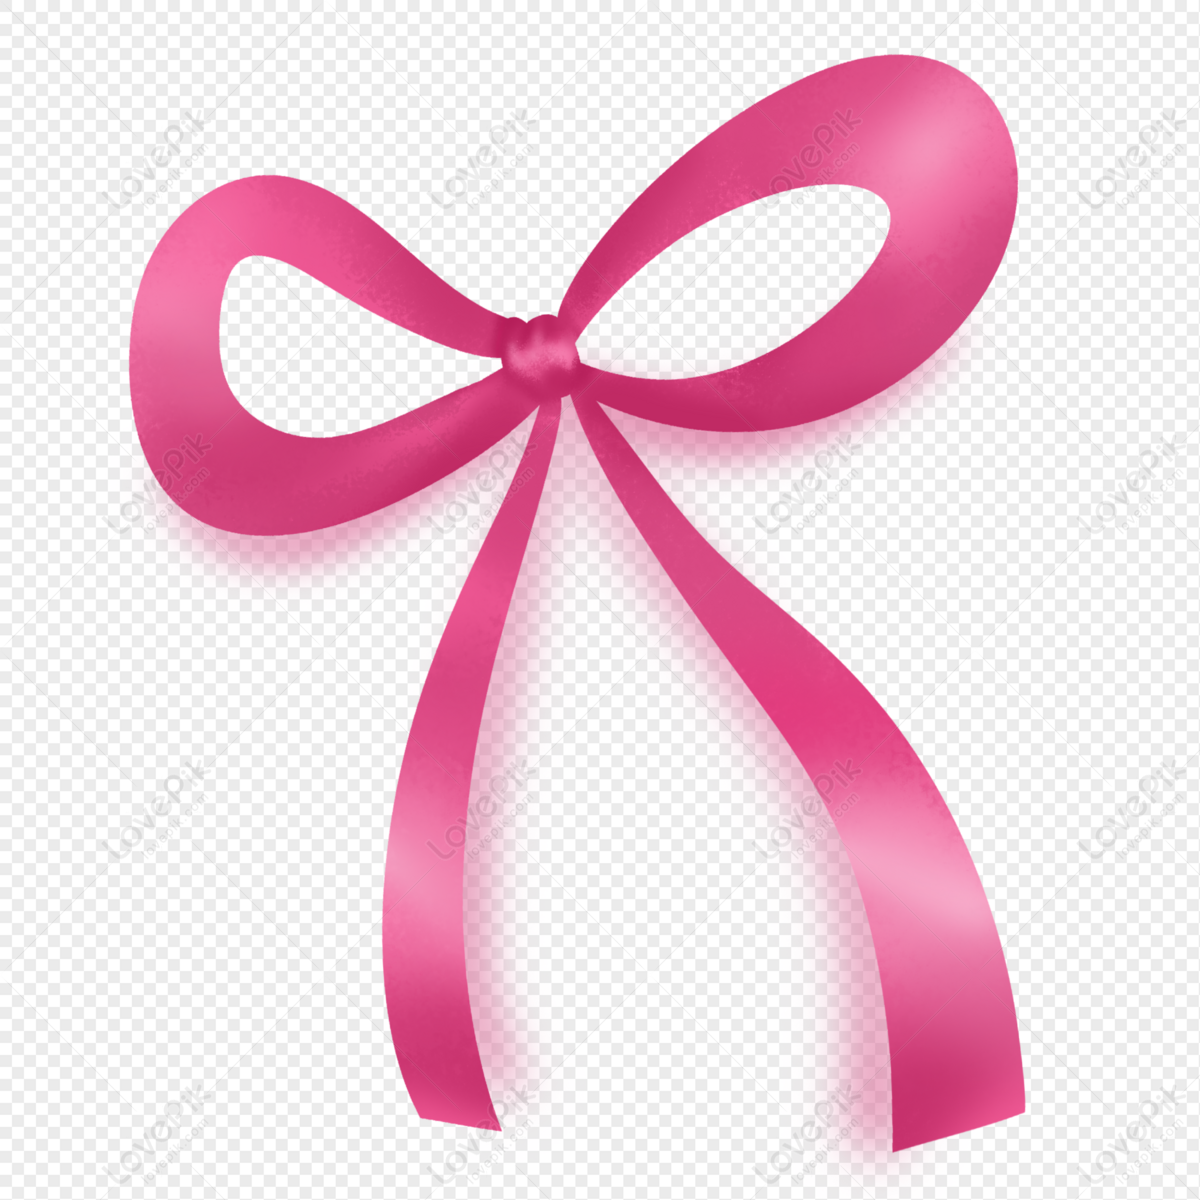 Pink Ribbon Pink Ribbon PNG, Clipart, Adornment, Bow, Bow Tie - Clip ...